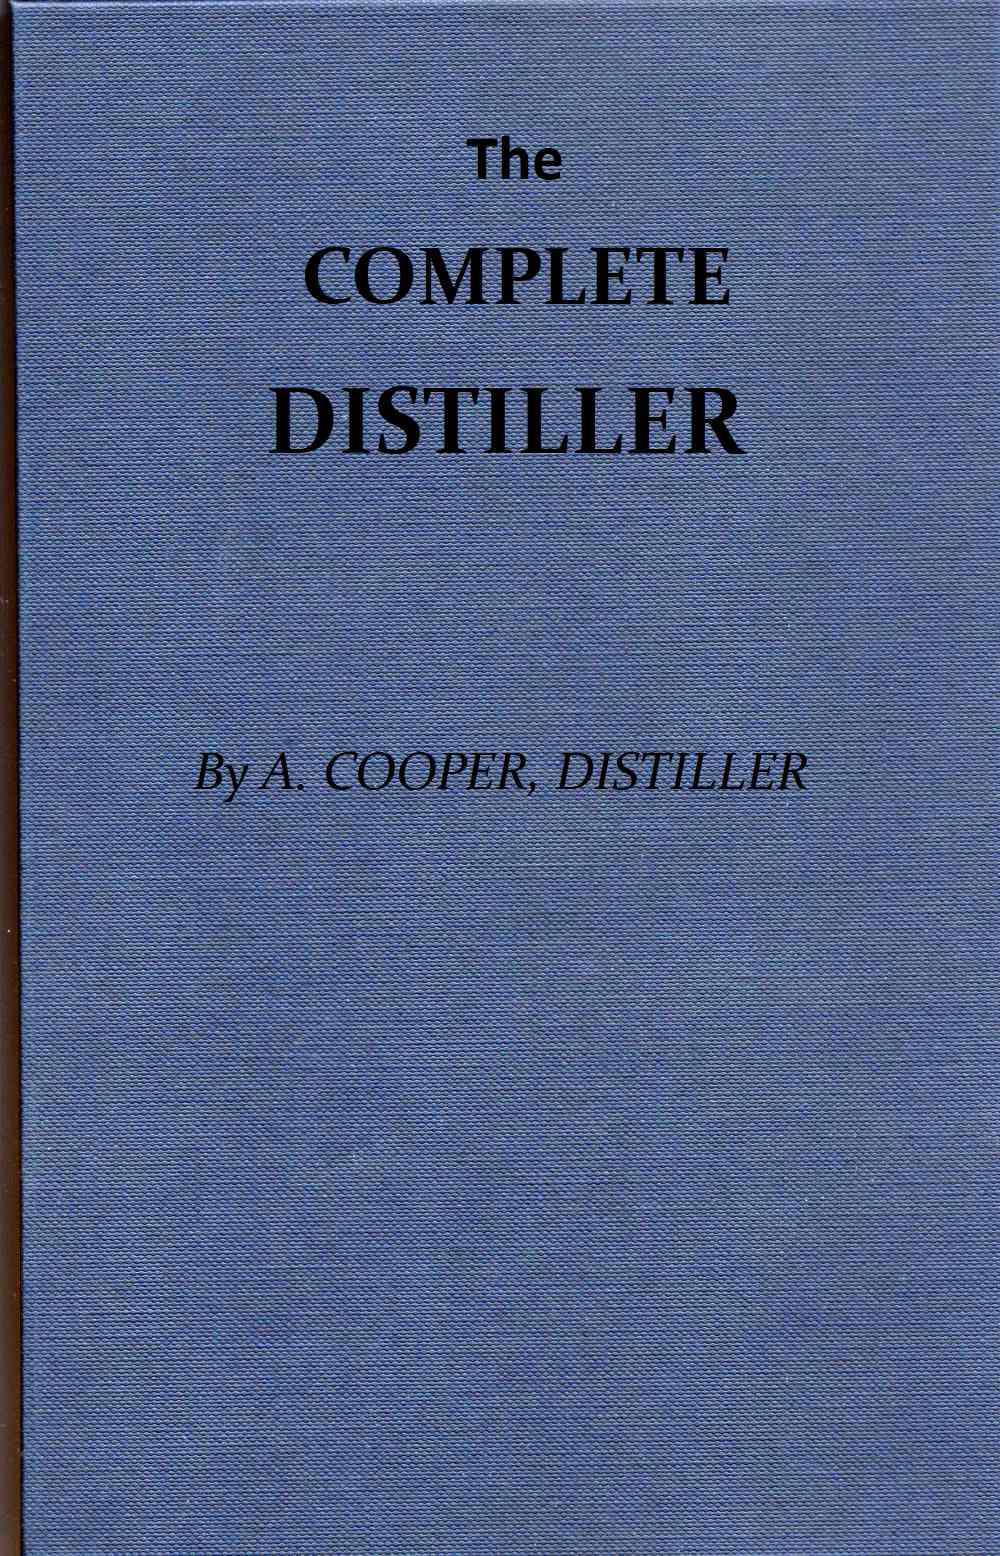 The Complete Distiller&#10;Containing, I. The method of performing the various processes of distillation, with descriptions of the several instruments: the whole doctrine of fermentation: the manner of drawing spirits from malt, raisins, molasses, sugar, &c. and of rectifying them: with instructions for imitating, to the greatest perfection, both the colour and flavour of French brandies. II. The manner of distilling all kinds of simple waters from plants, flowers, &c. III. The method of making all the compound waters and rich cordials so largely imported from France and Italy; as likewise all those now made in Great Britain. To which are added, accurate descriptions of the several drugs, plants, flowers, fruits, &c. used by distillers, and instructions for chusing the best of each kind...